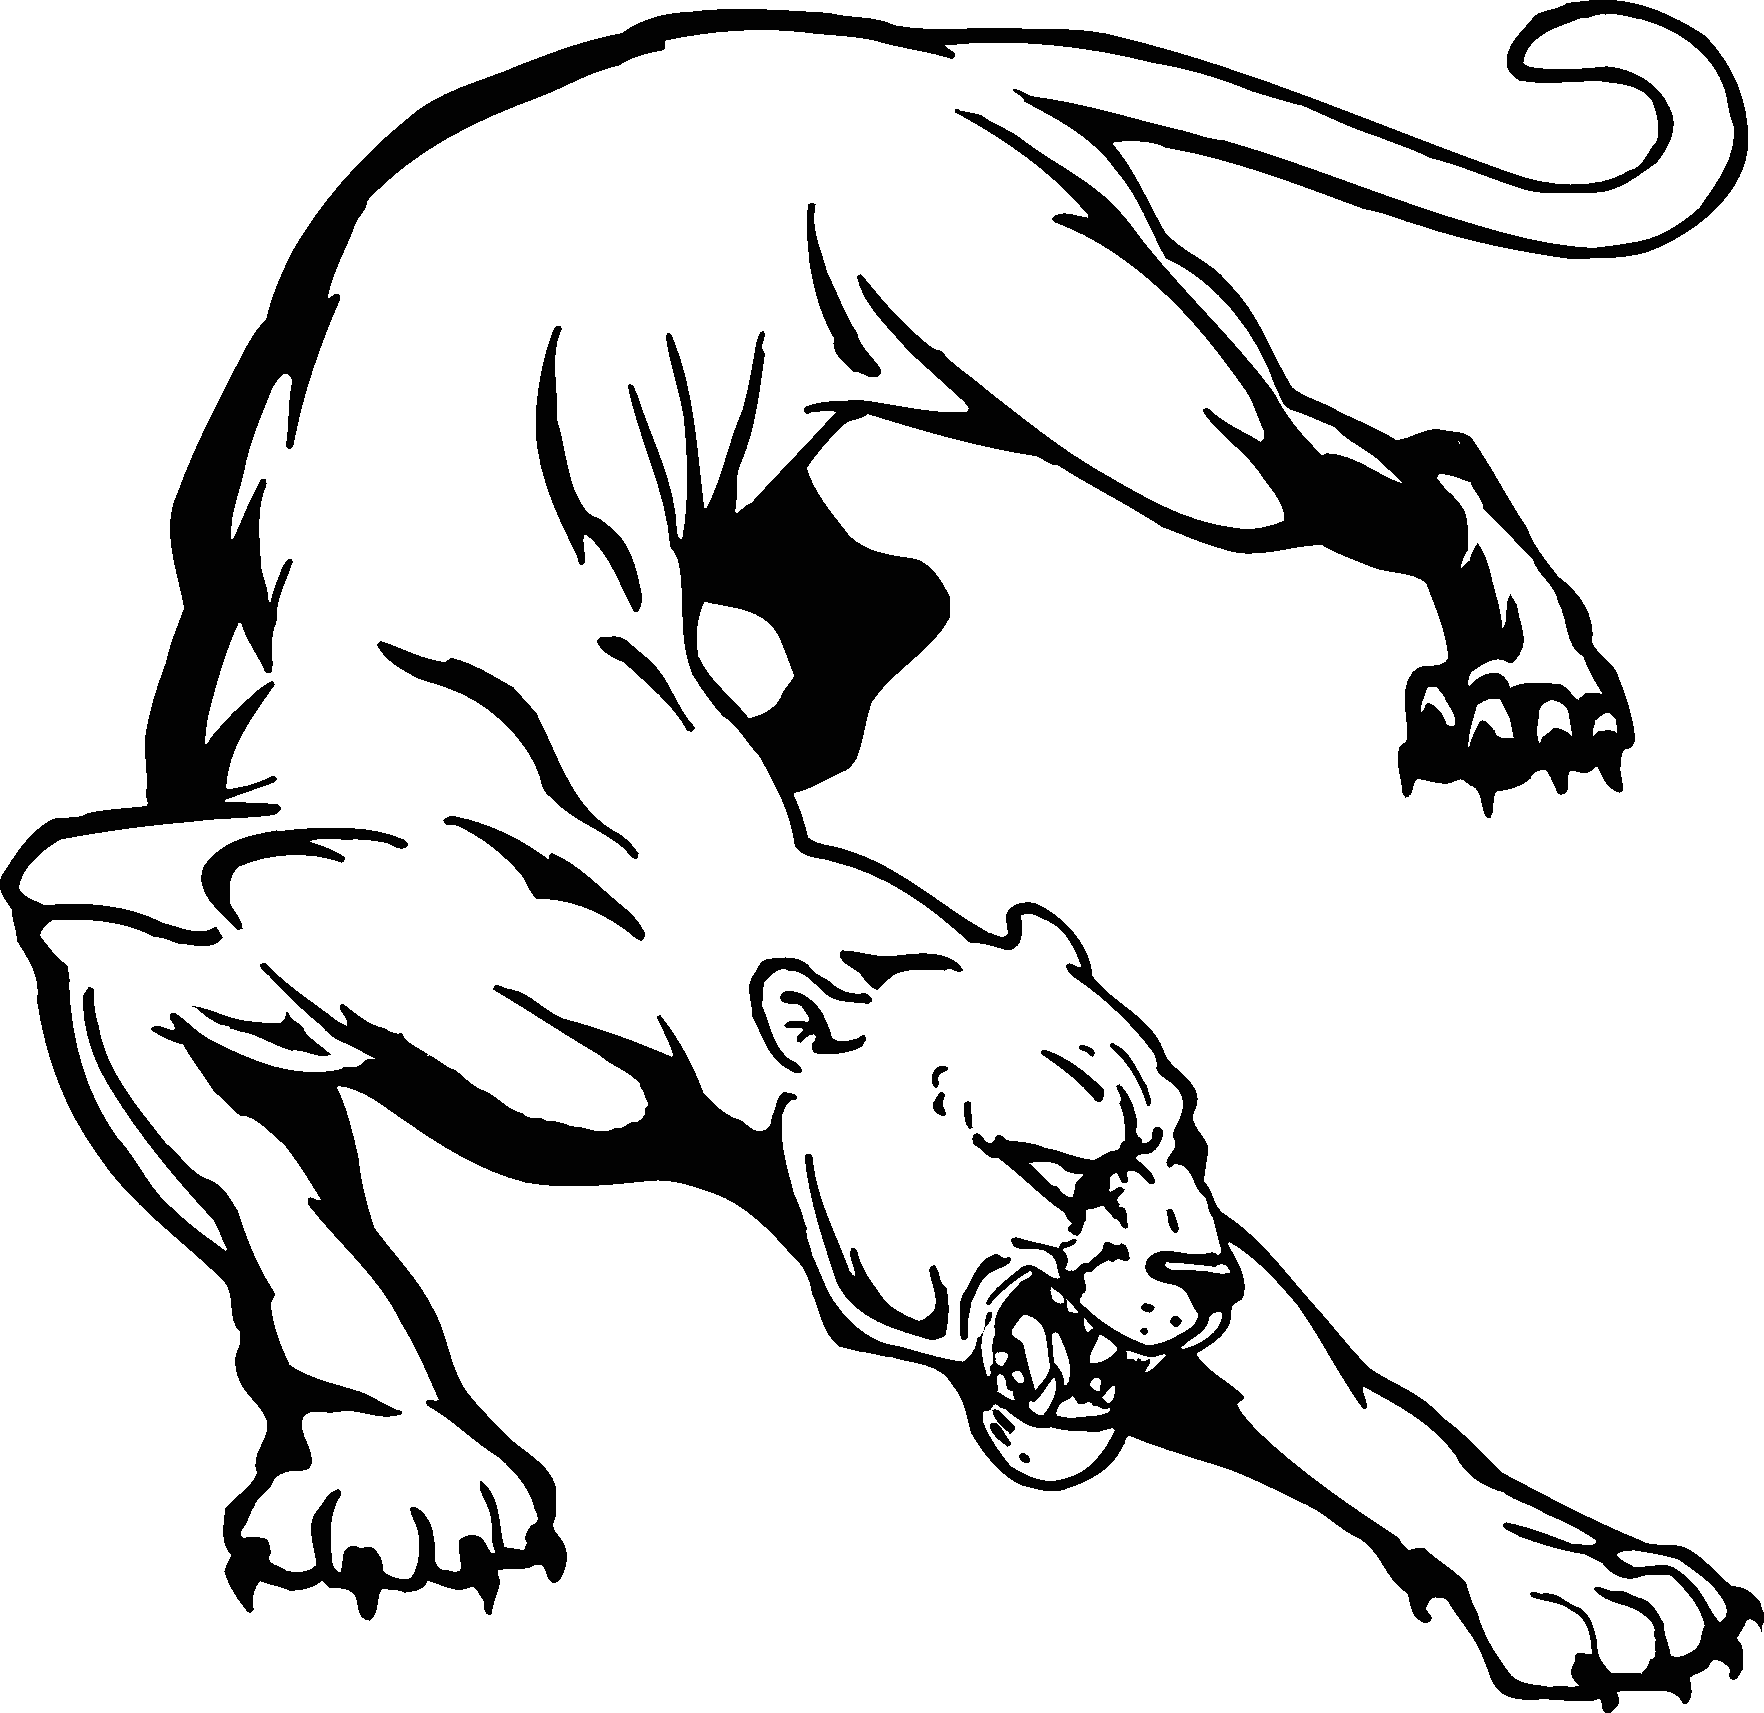 Panther Clip Art Images | Clipart Panda - Free Clipart Images